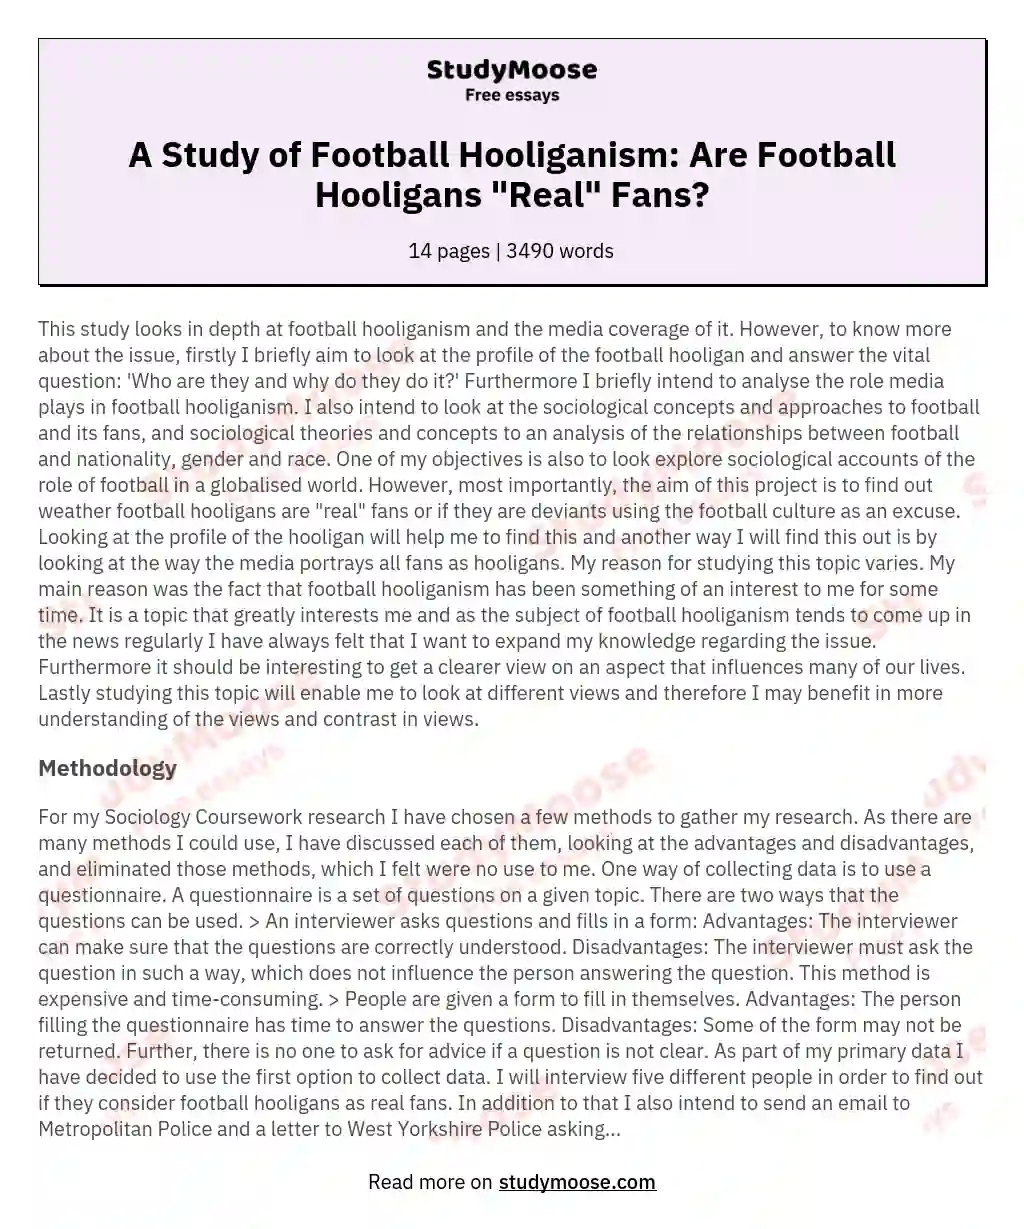 A Study of Football Hooliganism: Are Football Hooligans "Real" Fans?